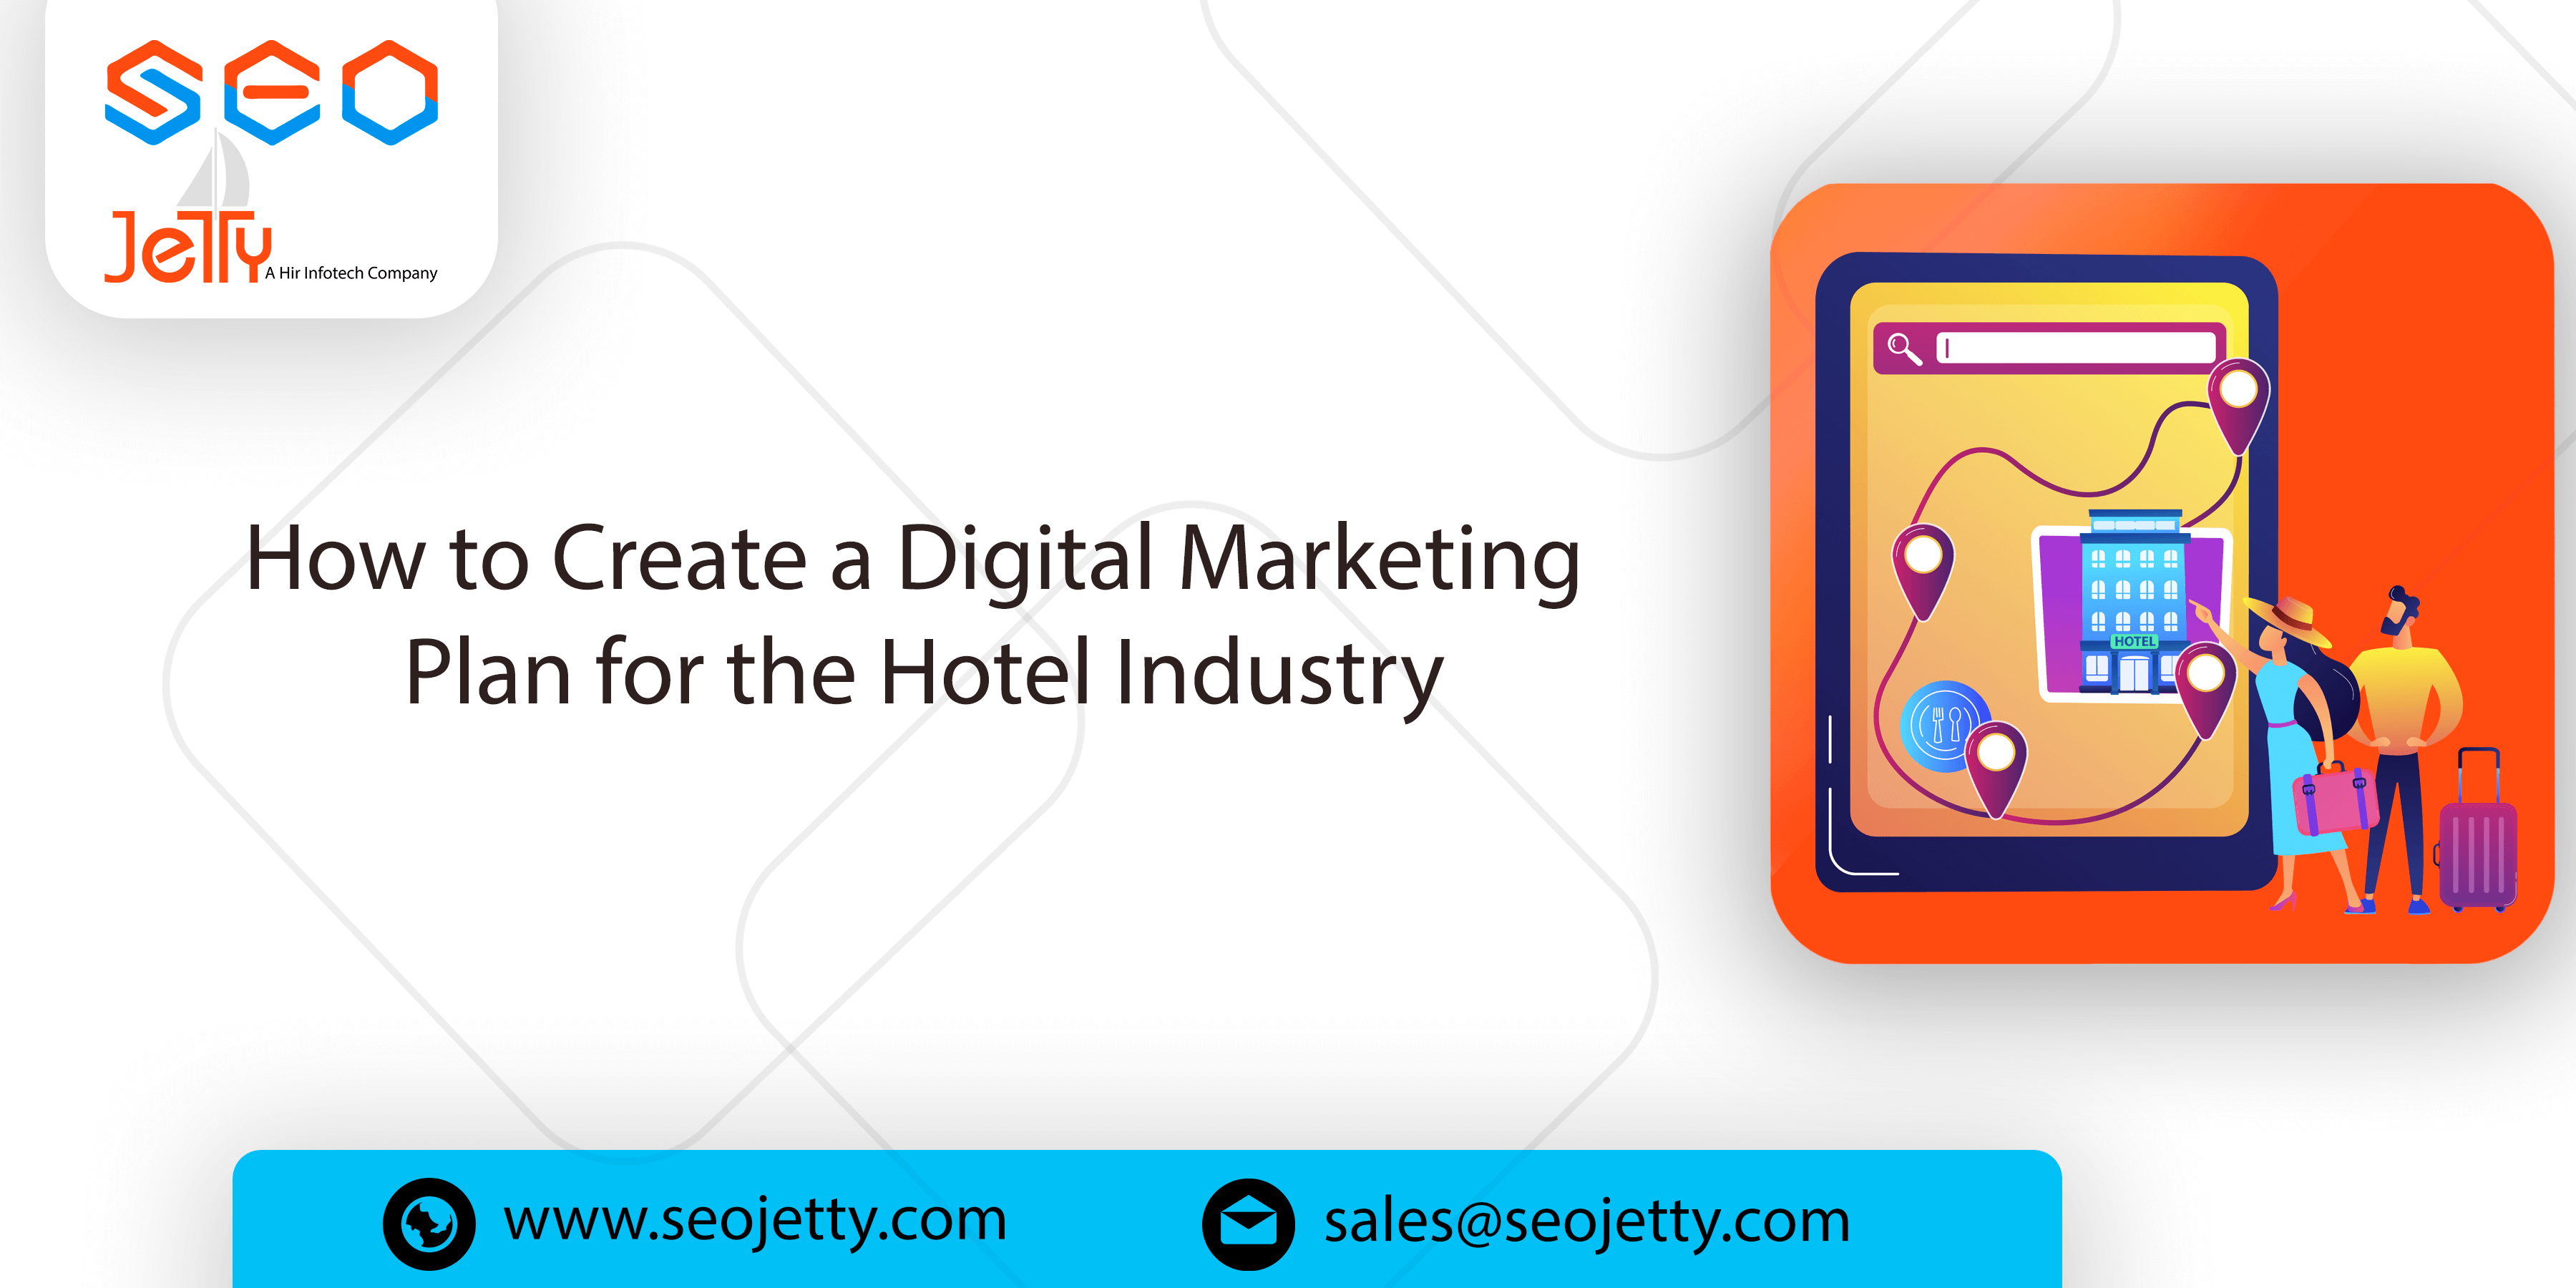 How to Create a Digital Marketing Plan for the Hotel Industry